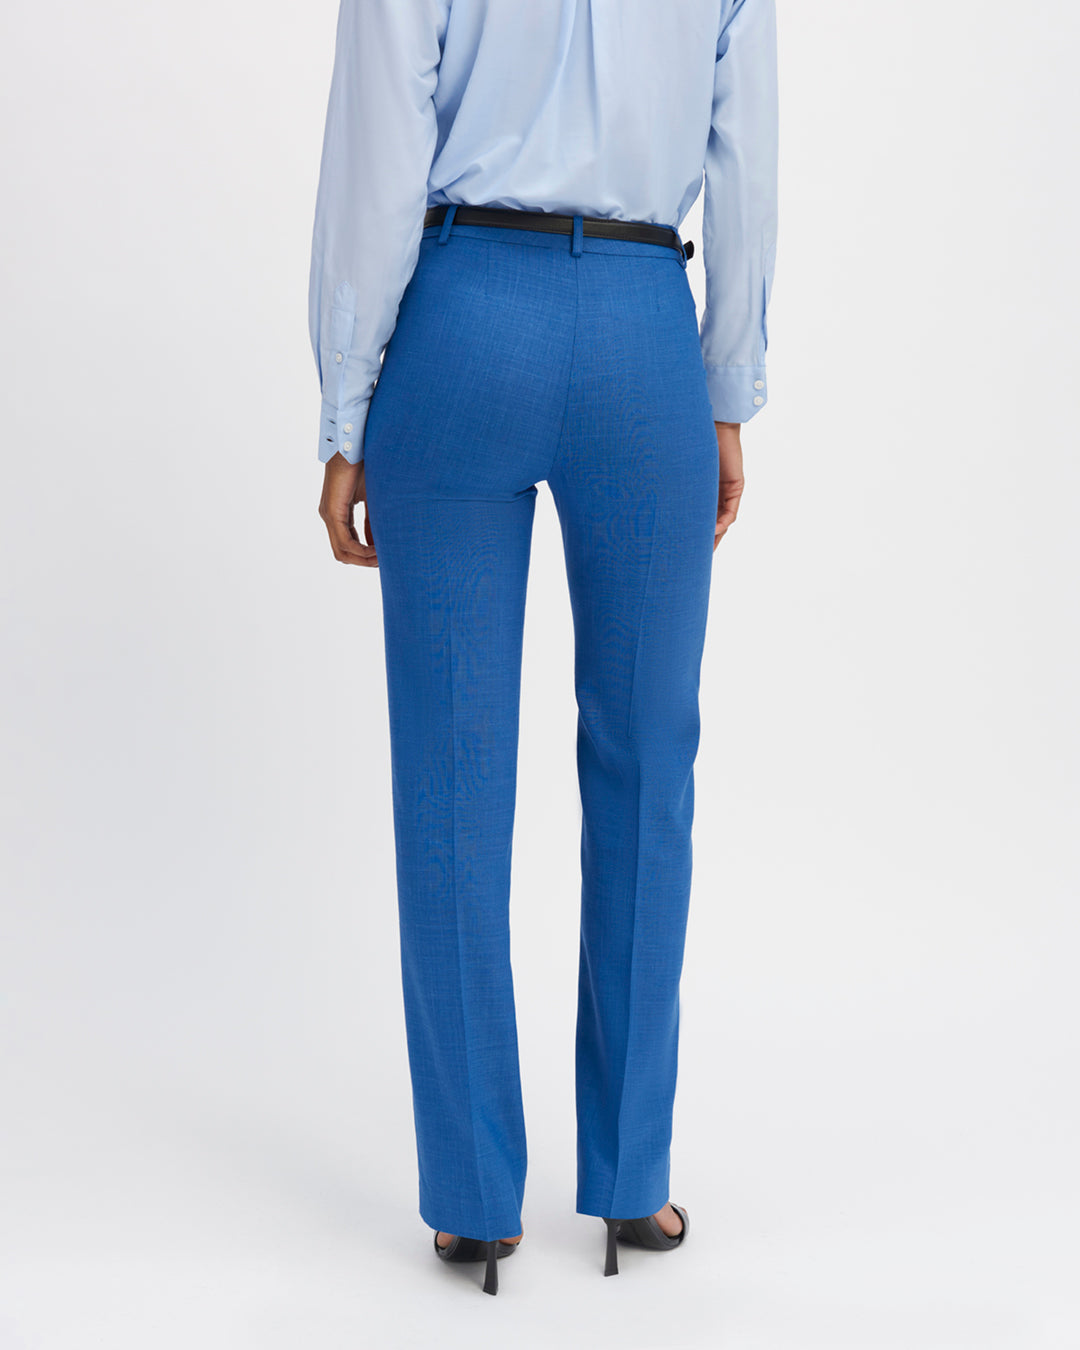 trousers-blue-azur-straight-cut-high-waist-pleated-front-zip-with-hook-17H10-tailors-for-women-paris-